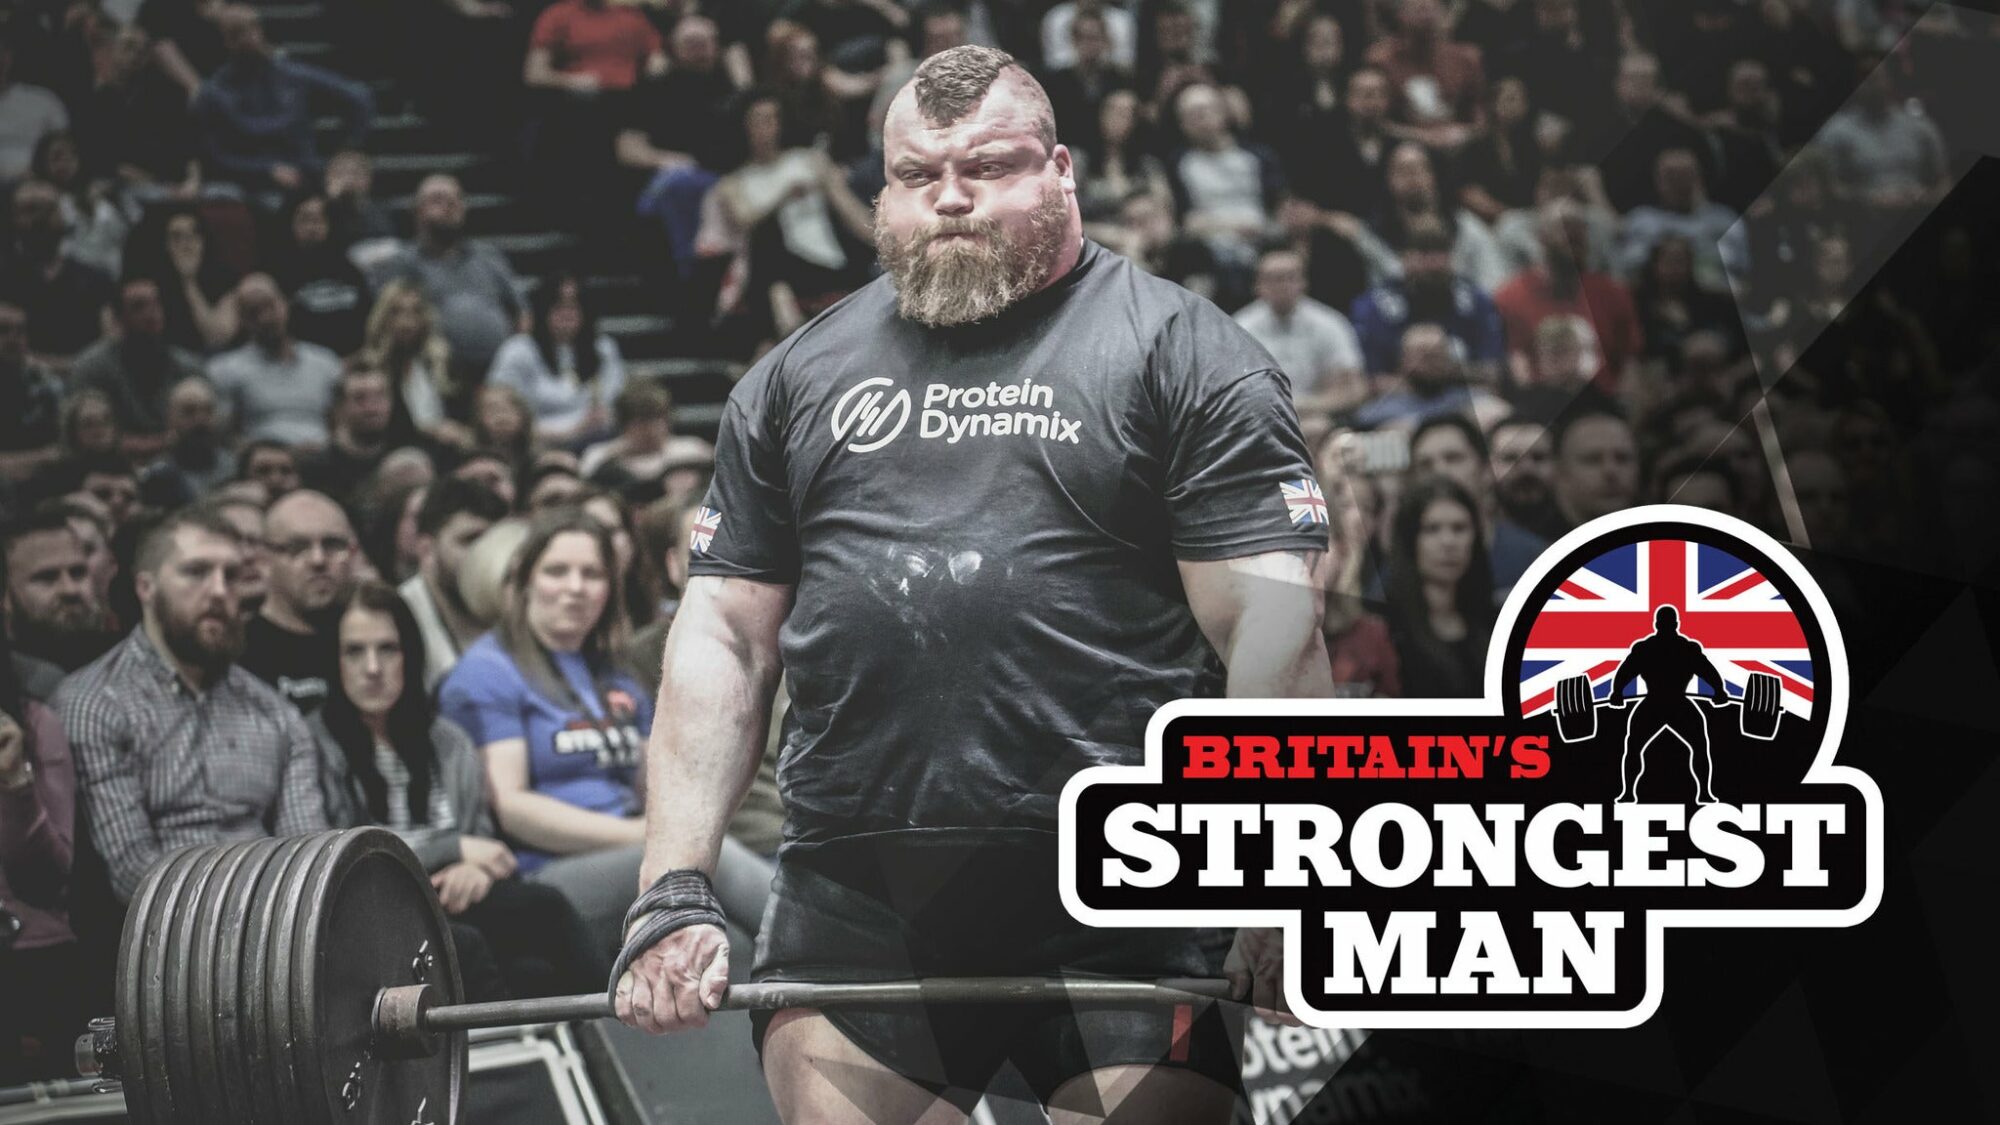 Image name Britains Strongest Man Hospitality Experiences at Utilita Arena Sheffield Sheffield the 19 image from the post Events in Yorkshire.com.